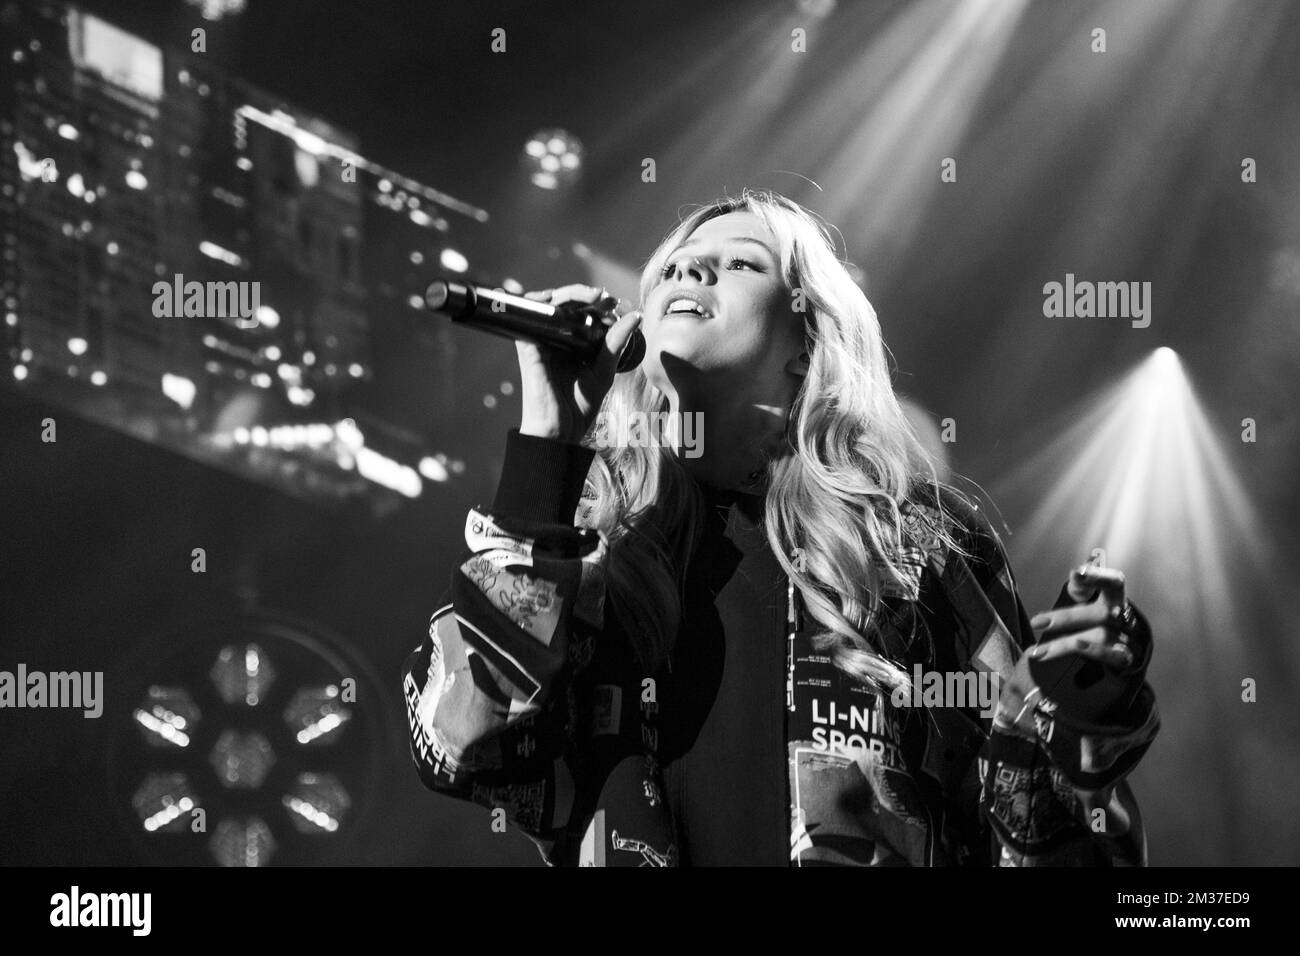 Belgian singer songwriter Black and White Stock Photos & Images - Alamy